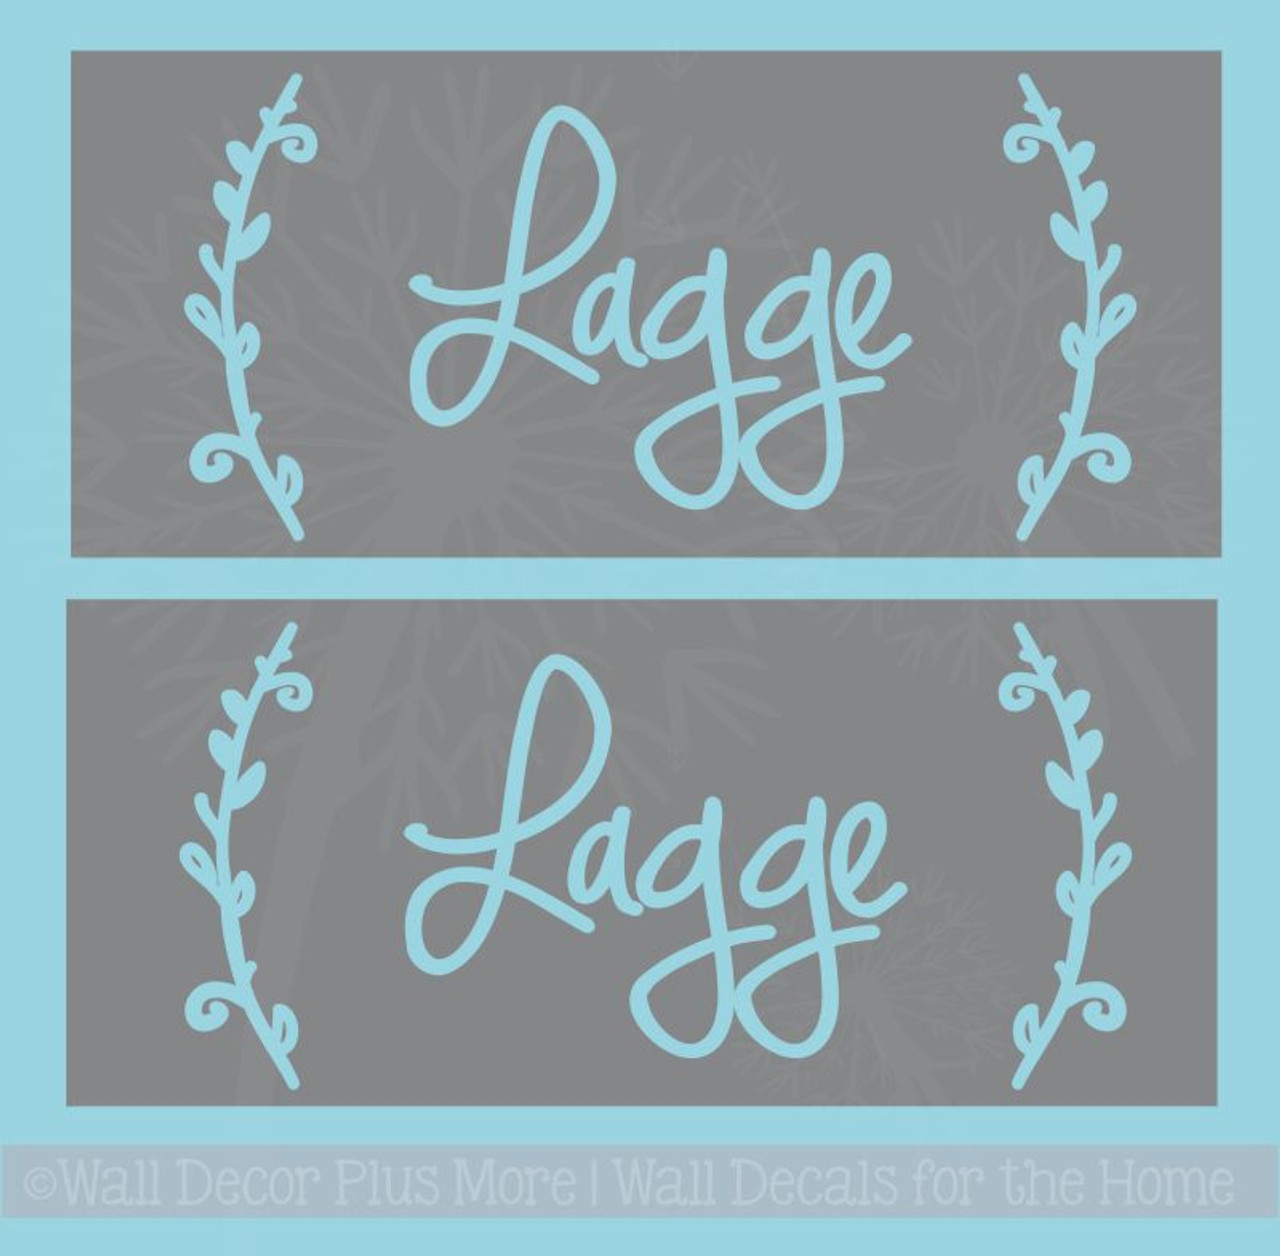 Personalised Gifts Decals Stickers & Stencils